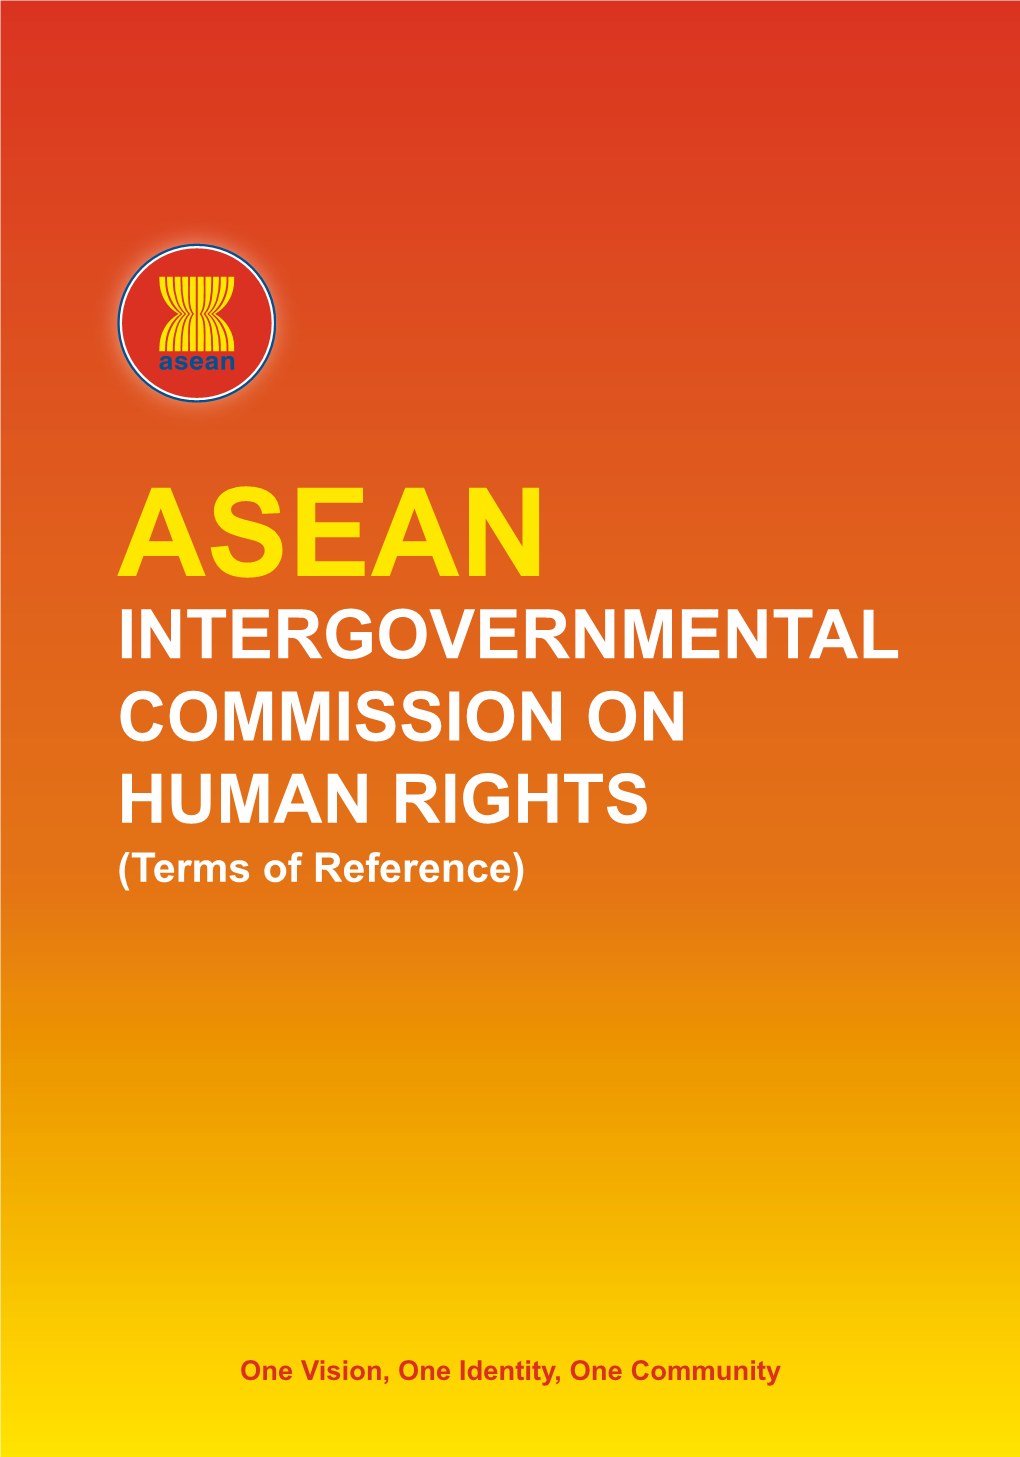 ASEAN INTERGOVERNMENTAL COMMISSION on HUMAN RIGHTS (Terms of Reference)